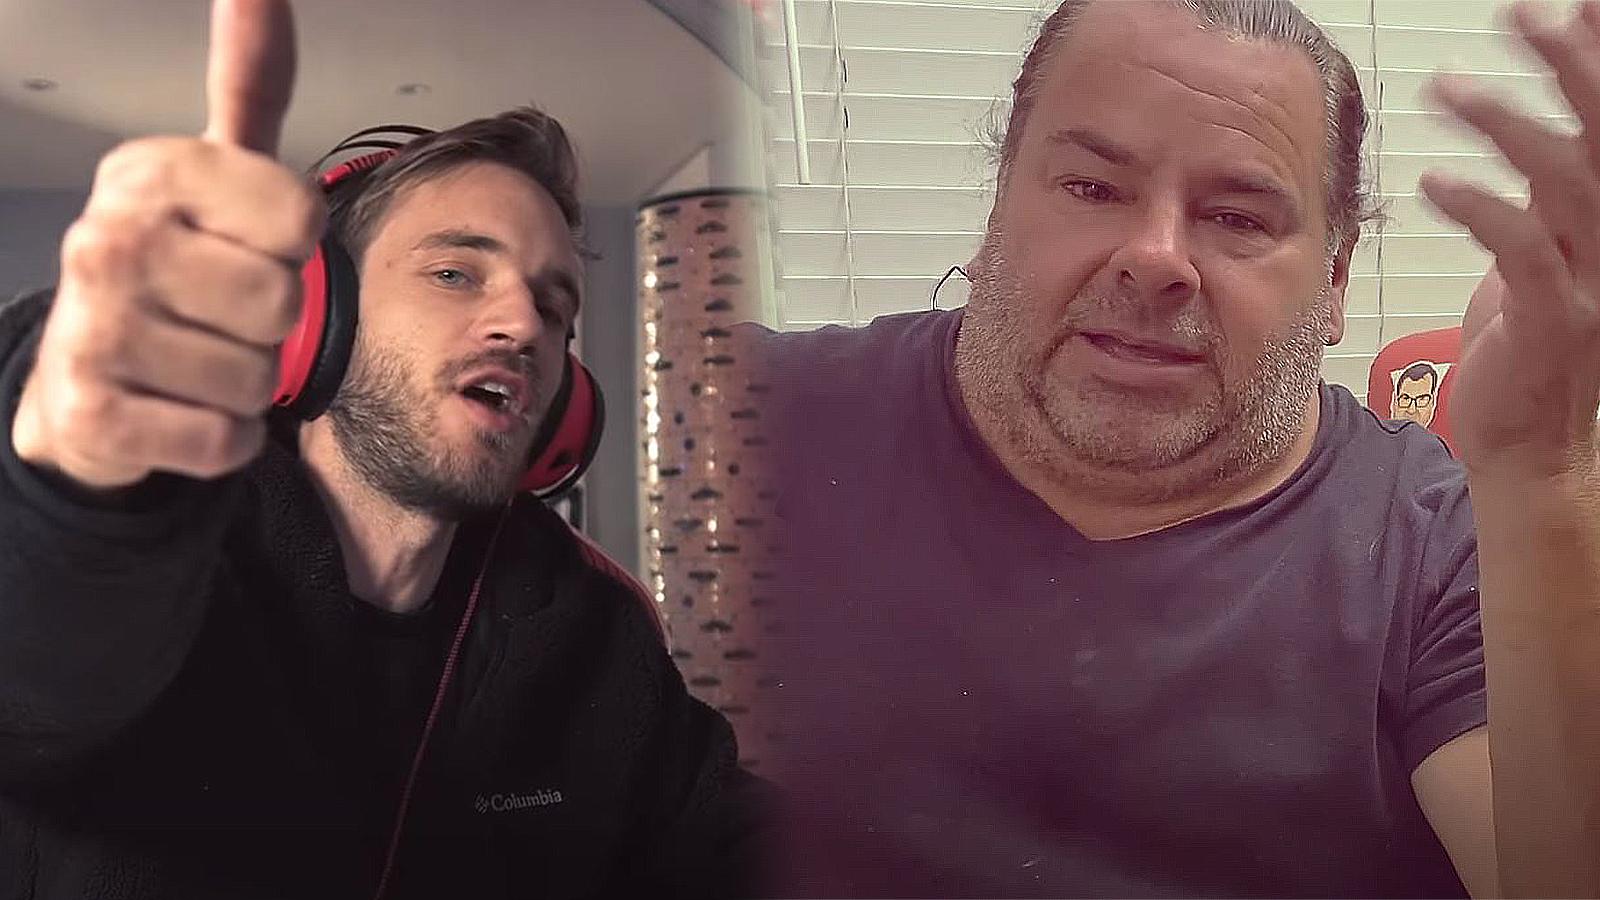 PewDiePie gives the camera a thumbs-up beside a photo of Big Ed.